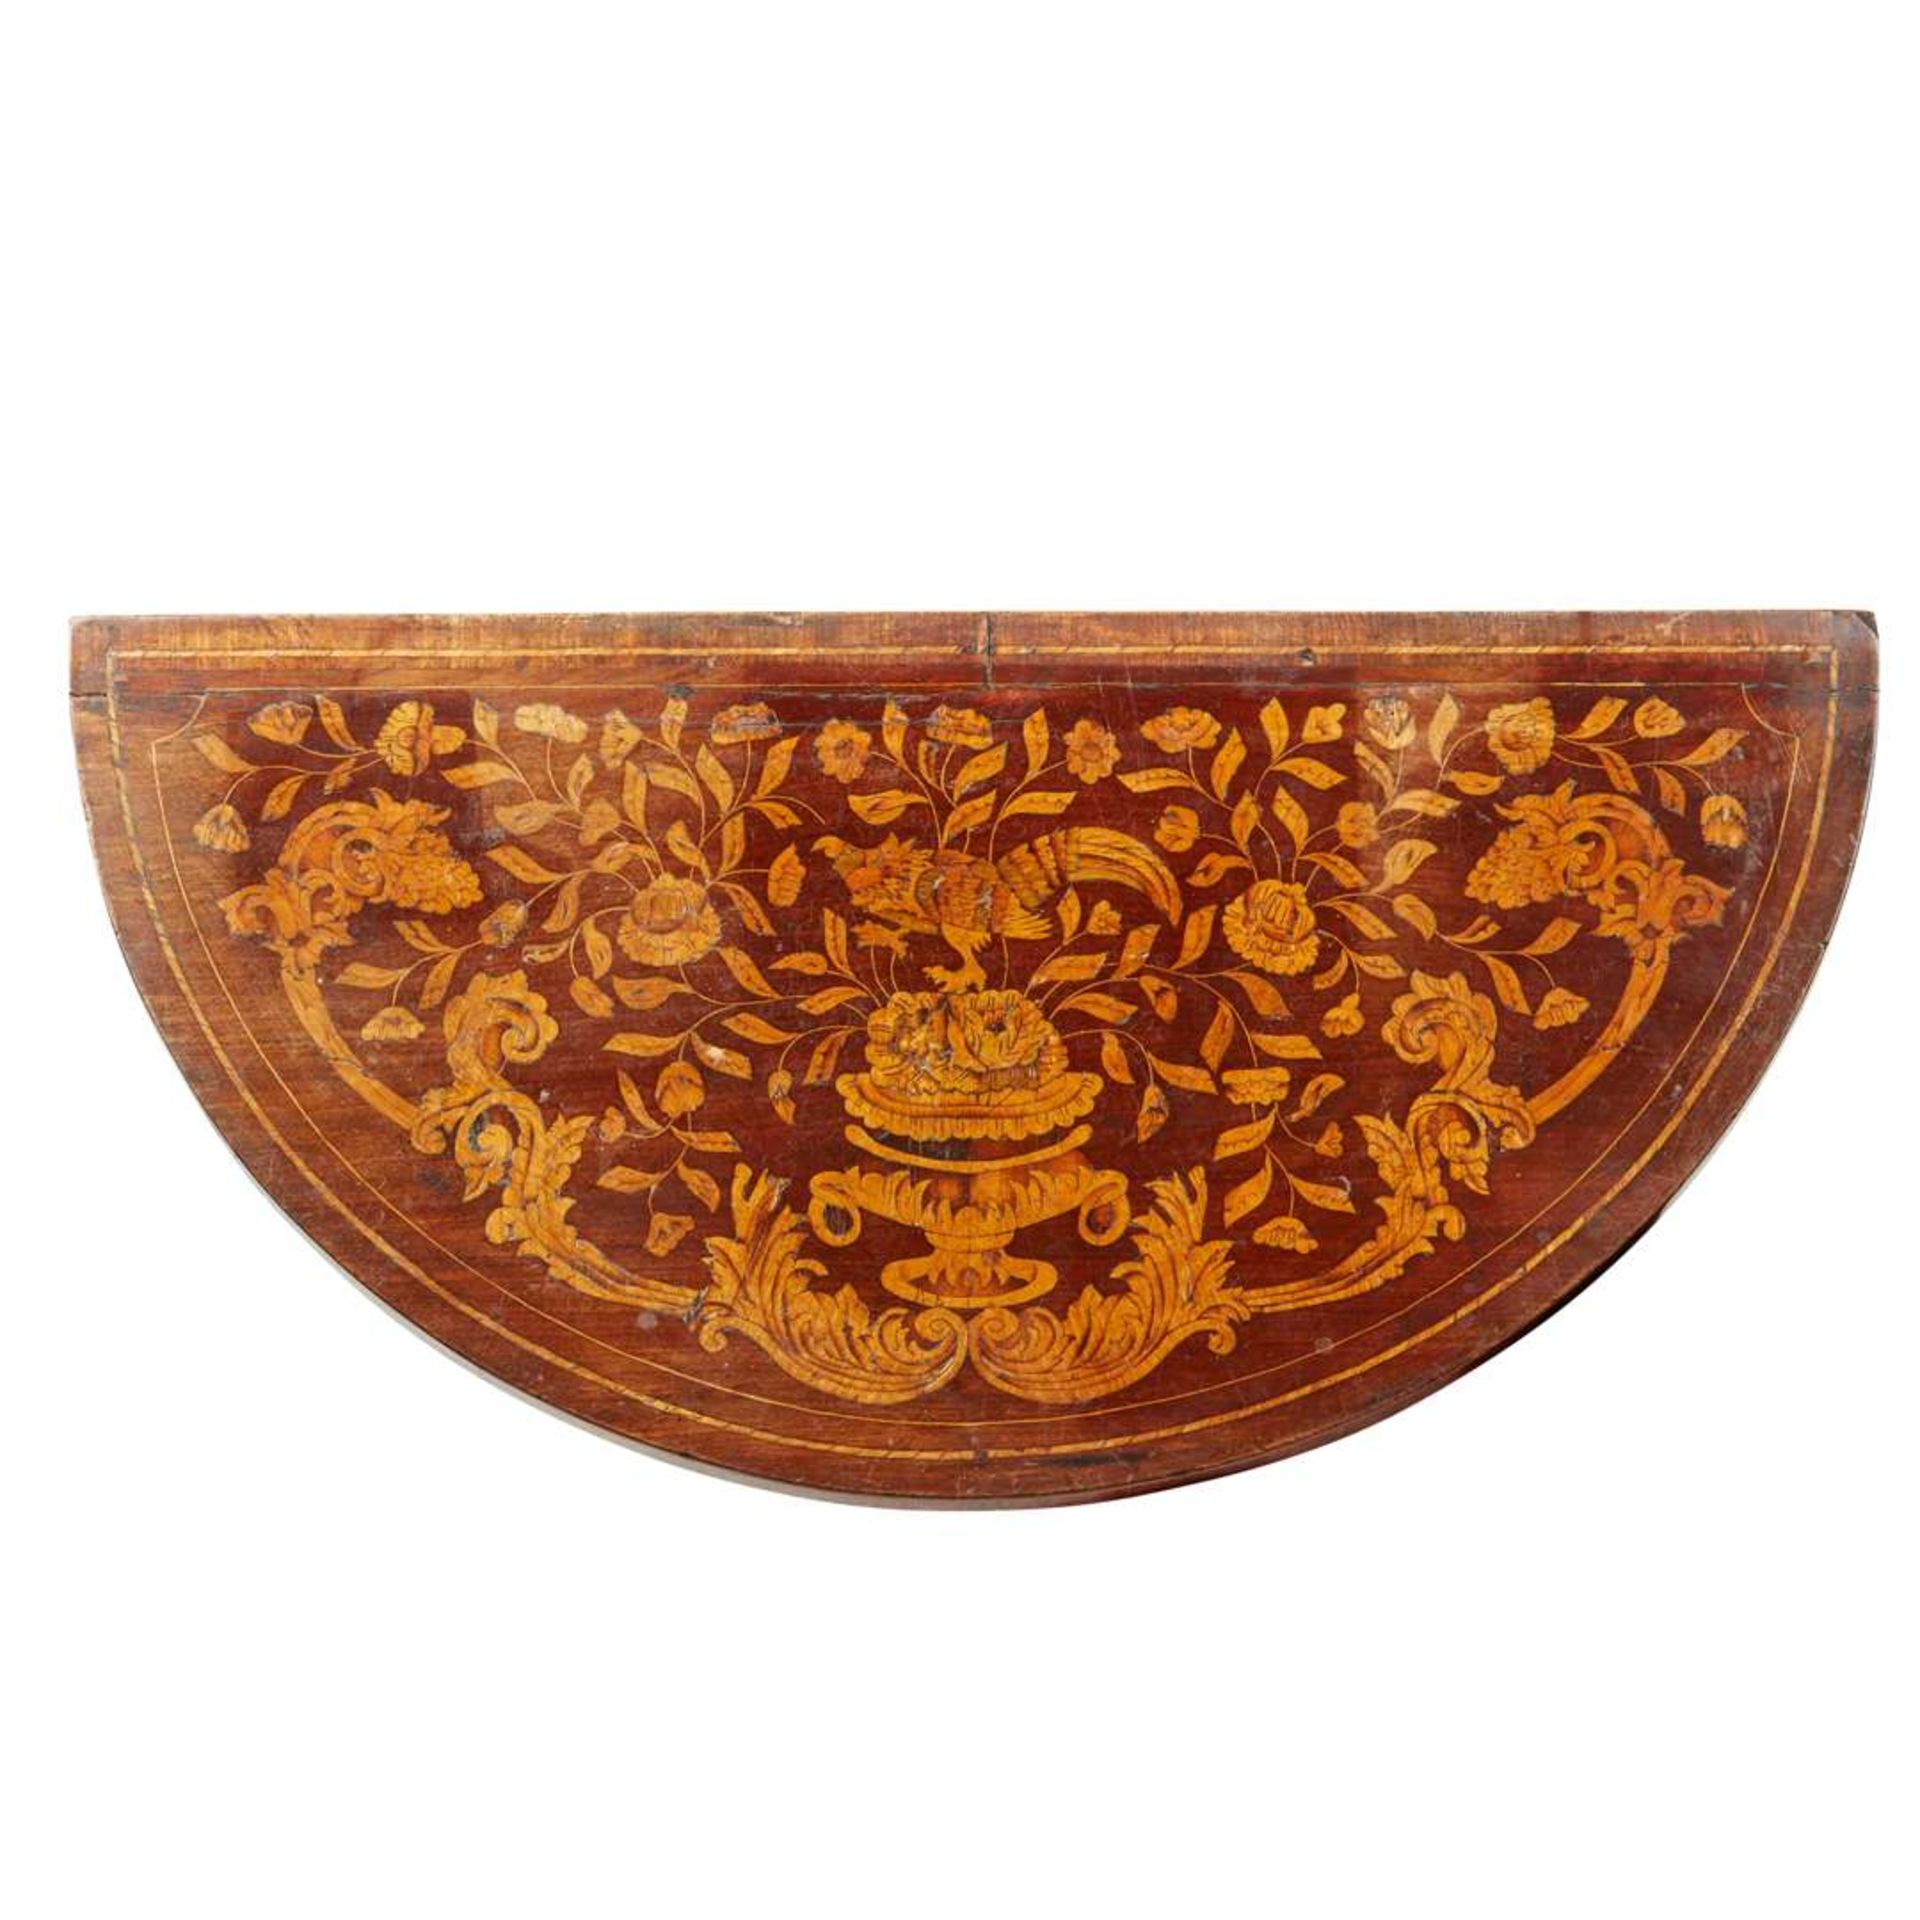 DUTCH FLORAL MARQUETRY DEMILUNE MAHOGANY TABLE - Image 2 of 2